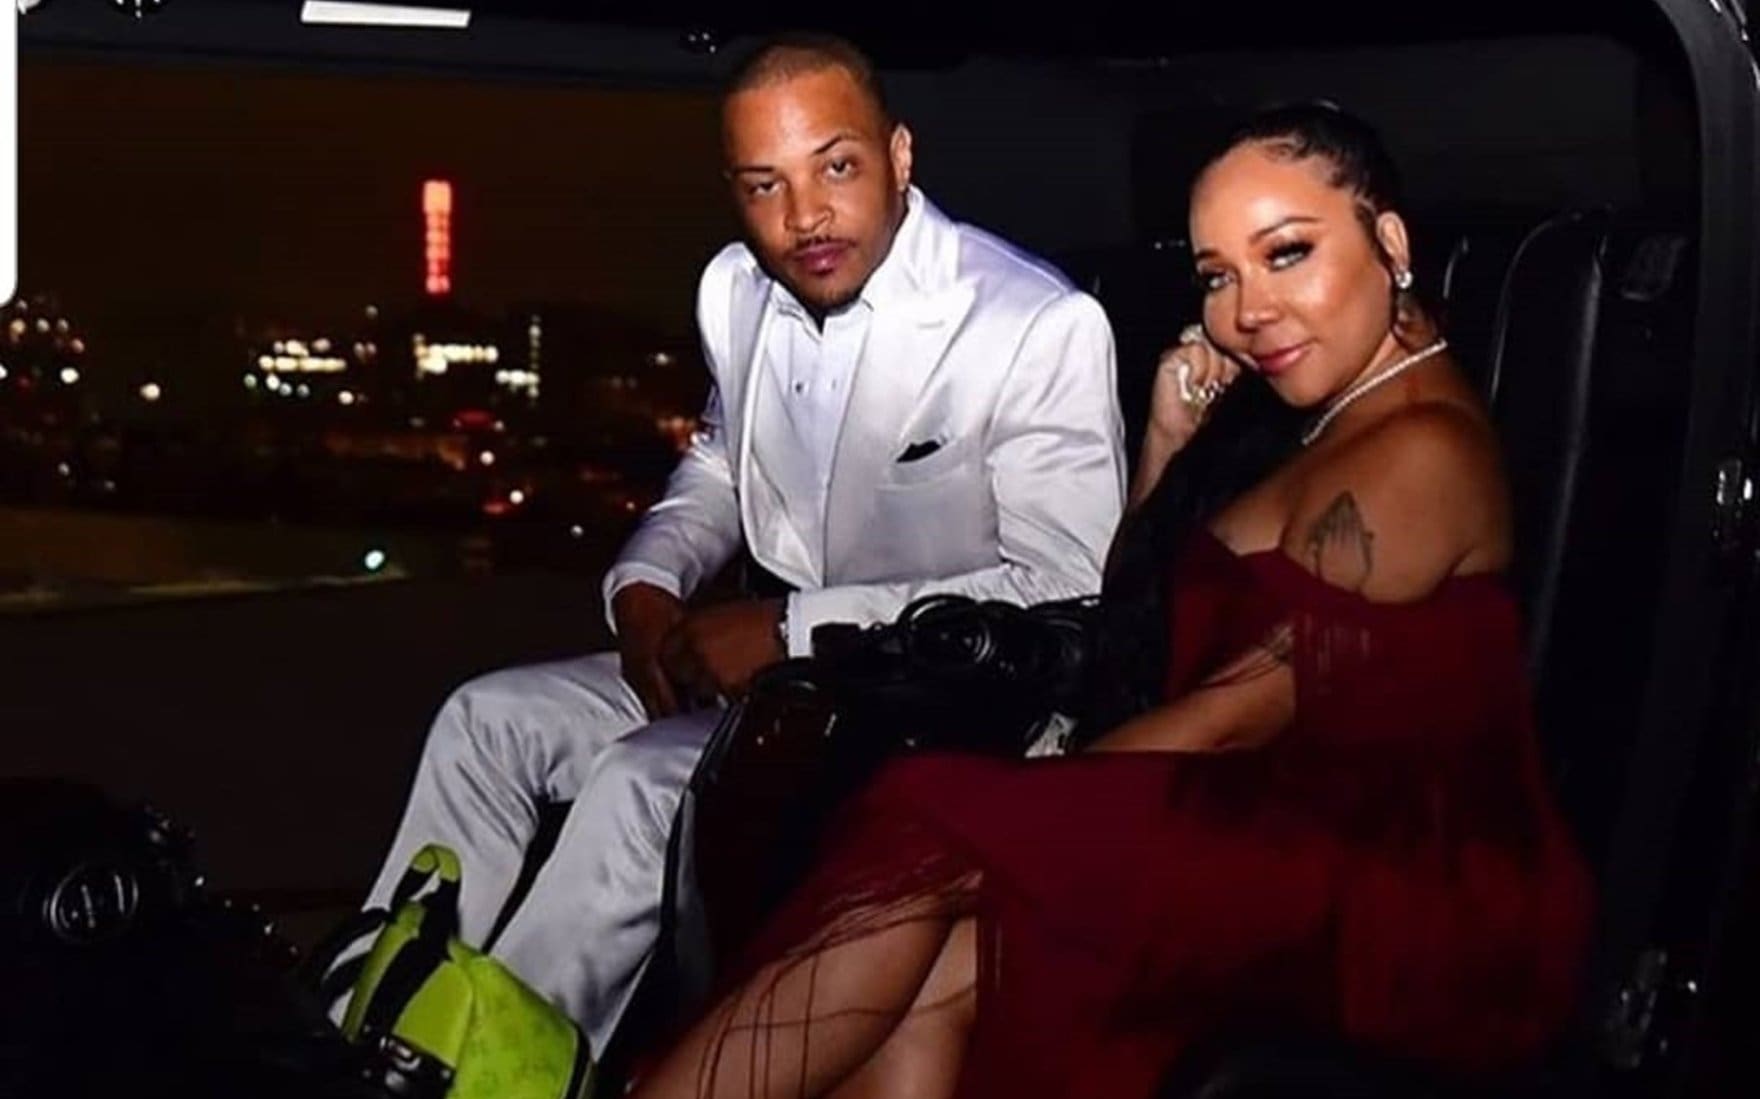 Tiny Harris Is T.I.'s 'Trixie' For Halloween: 'Atlanta's Own Bonnie & Clyde' - See The Couple's Cute Pics